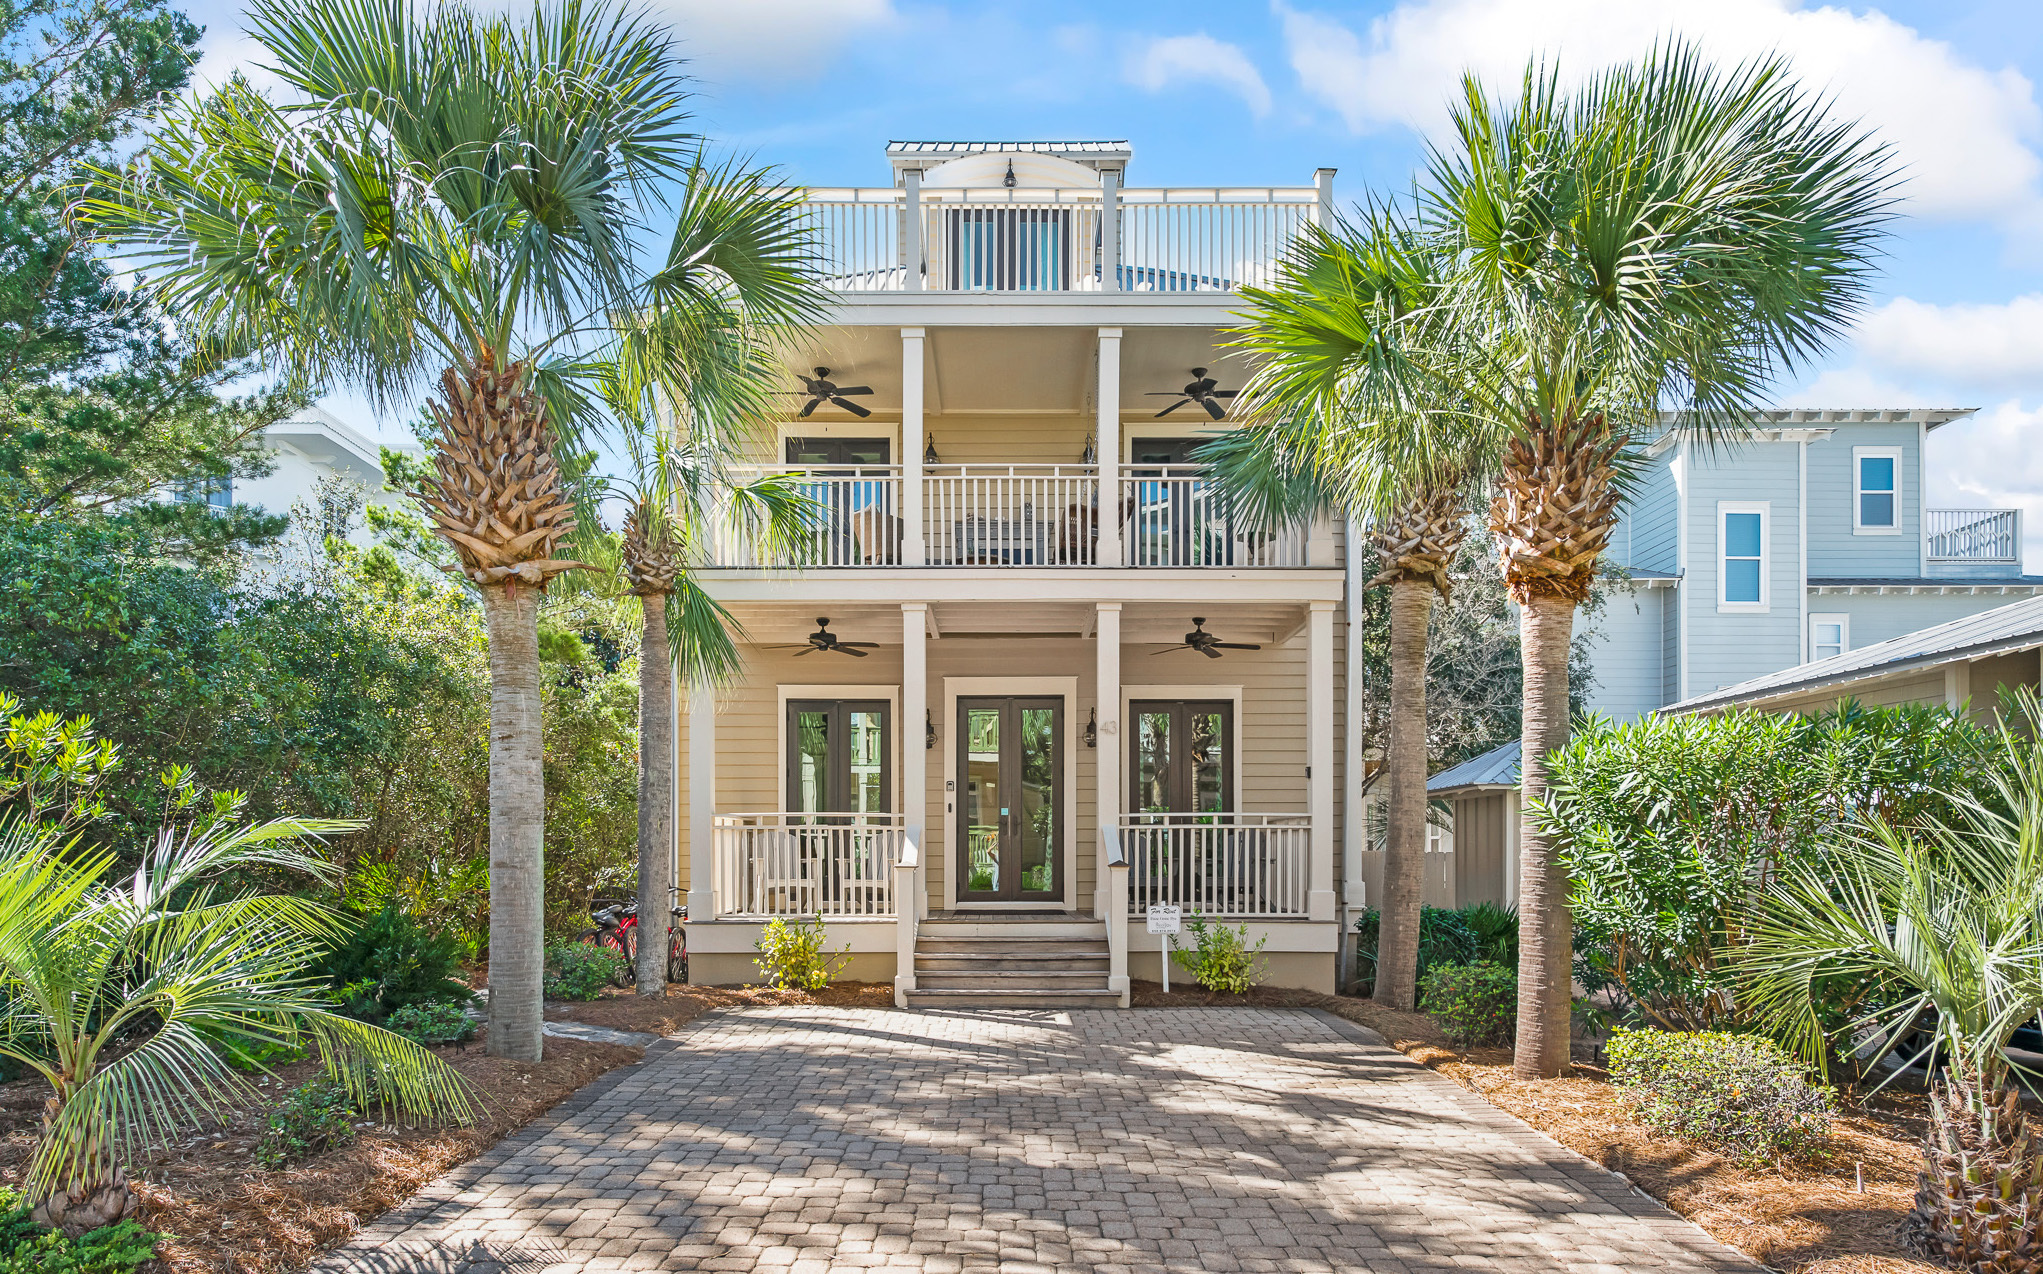 A two story beach cottage in Seacrest Beach with majestic palm trees